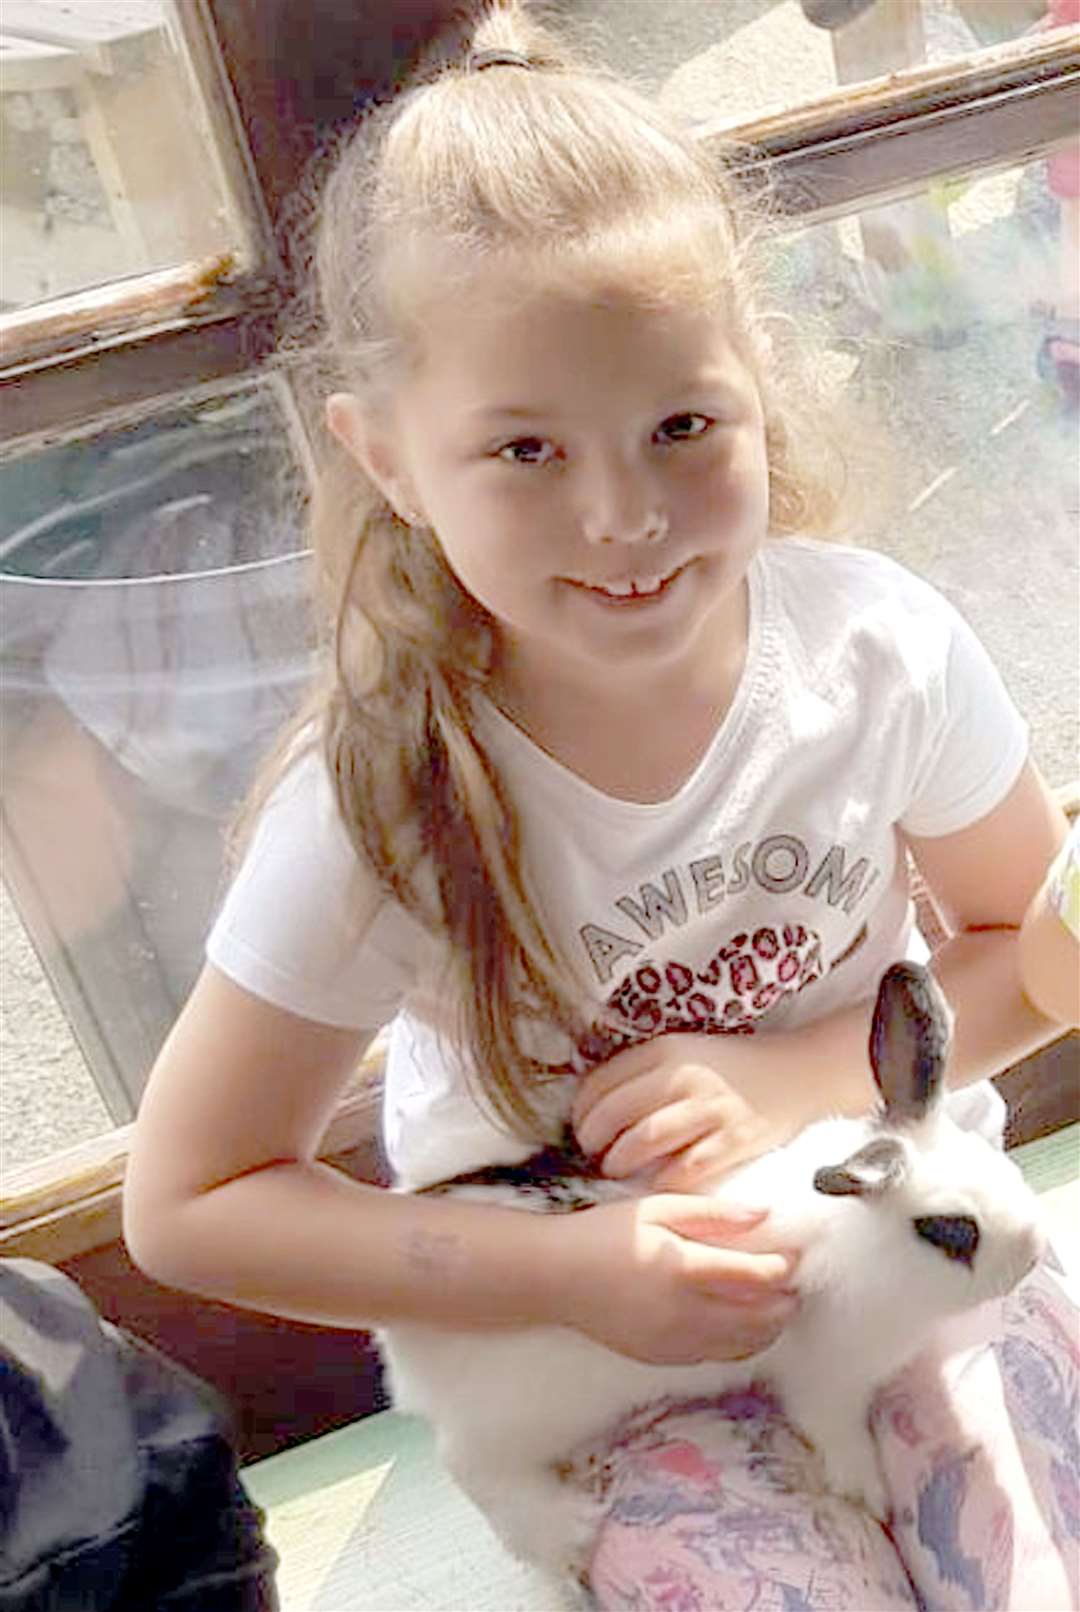 Olivia Pratt-Korbel was fatally shot by a gunman who chased another man into her home in Dovecot, Liverpool, in August 2022 (Family handout/Merseyside Police/PA)